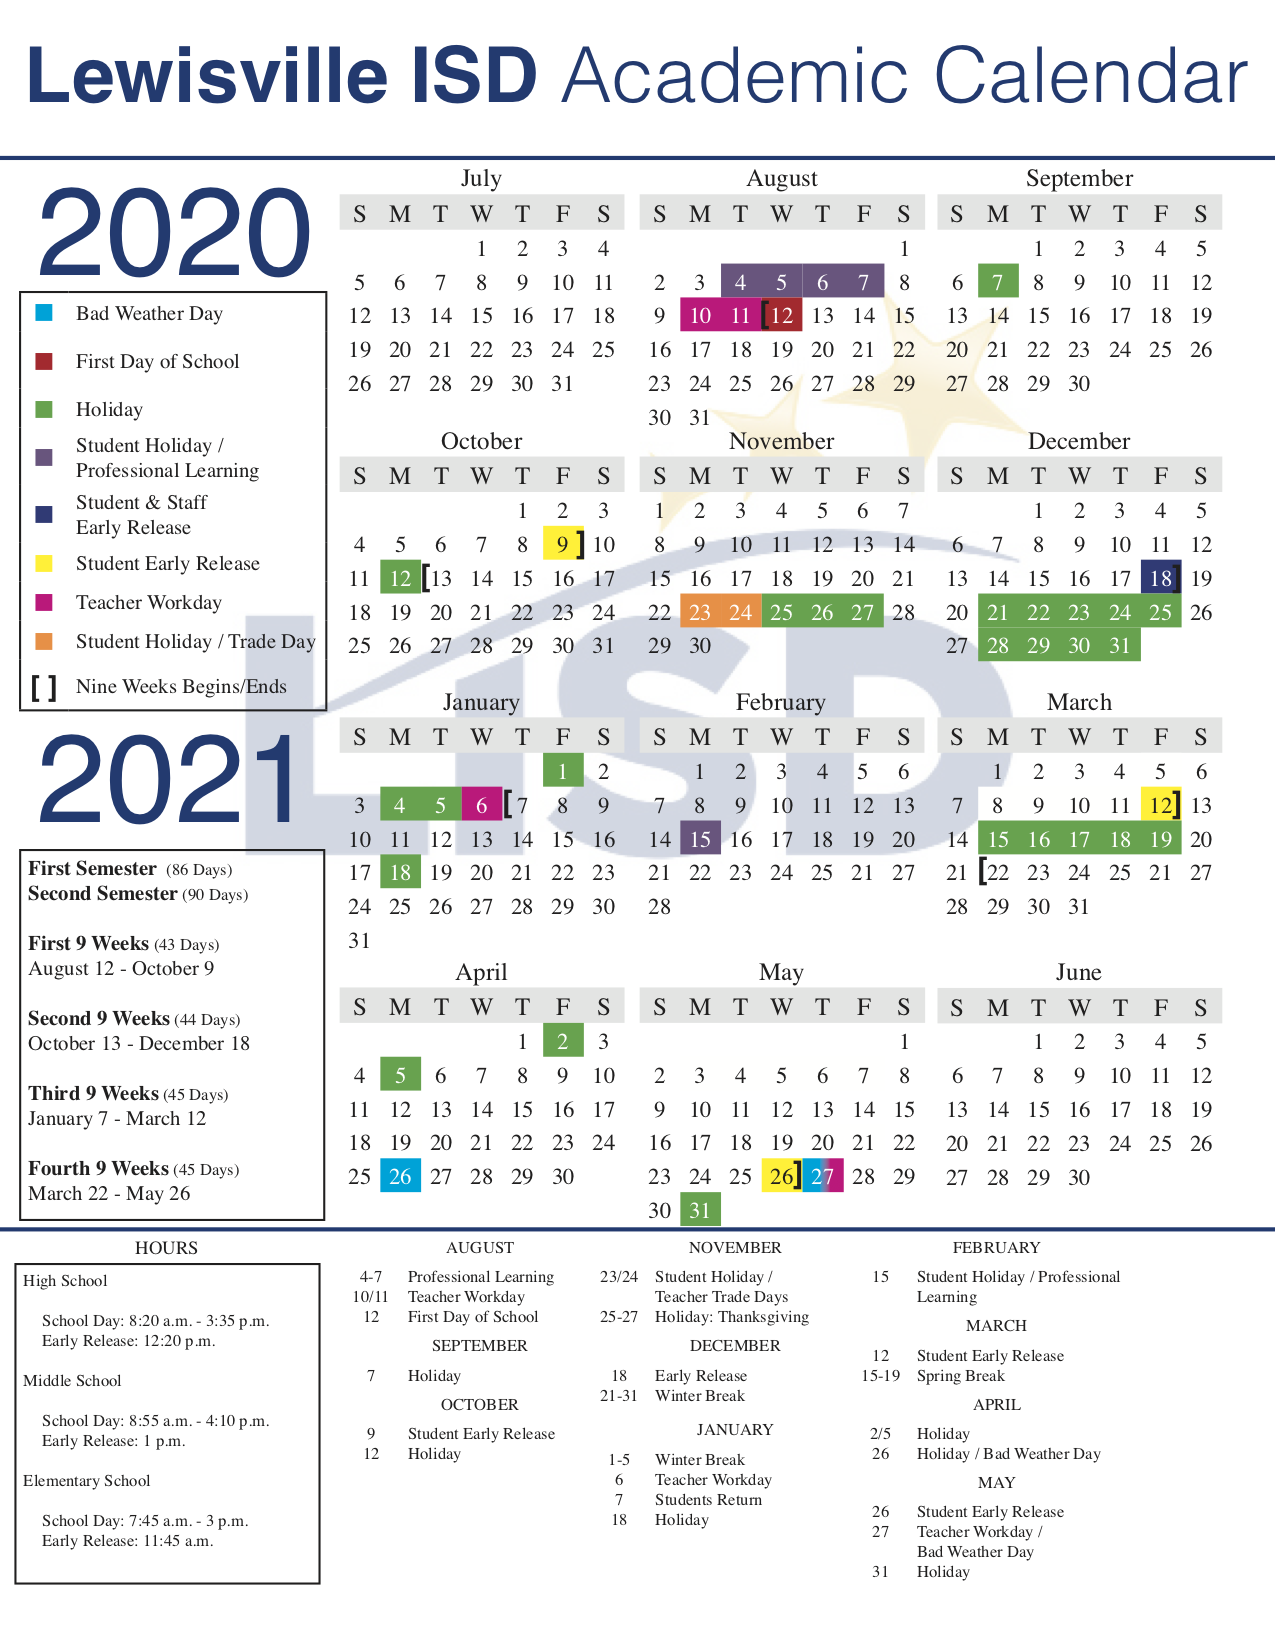 lewisville-isd-calendar-2021-22-customize-and-print